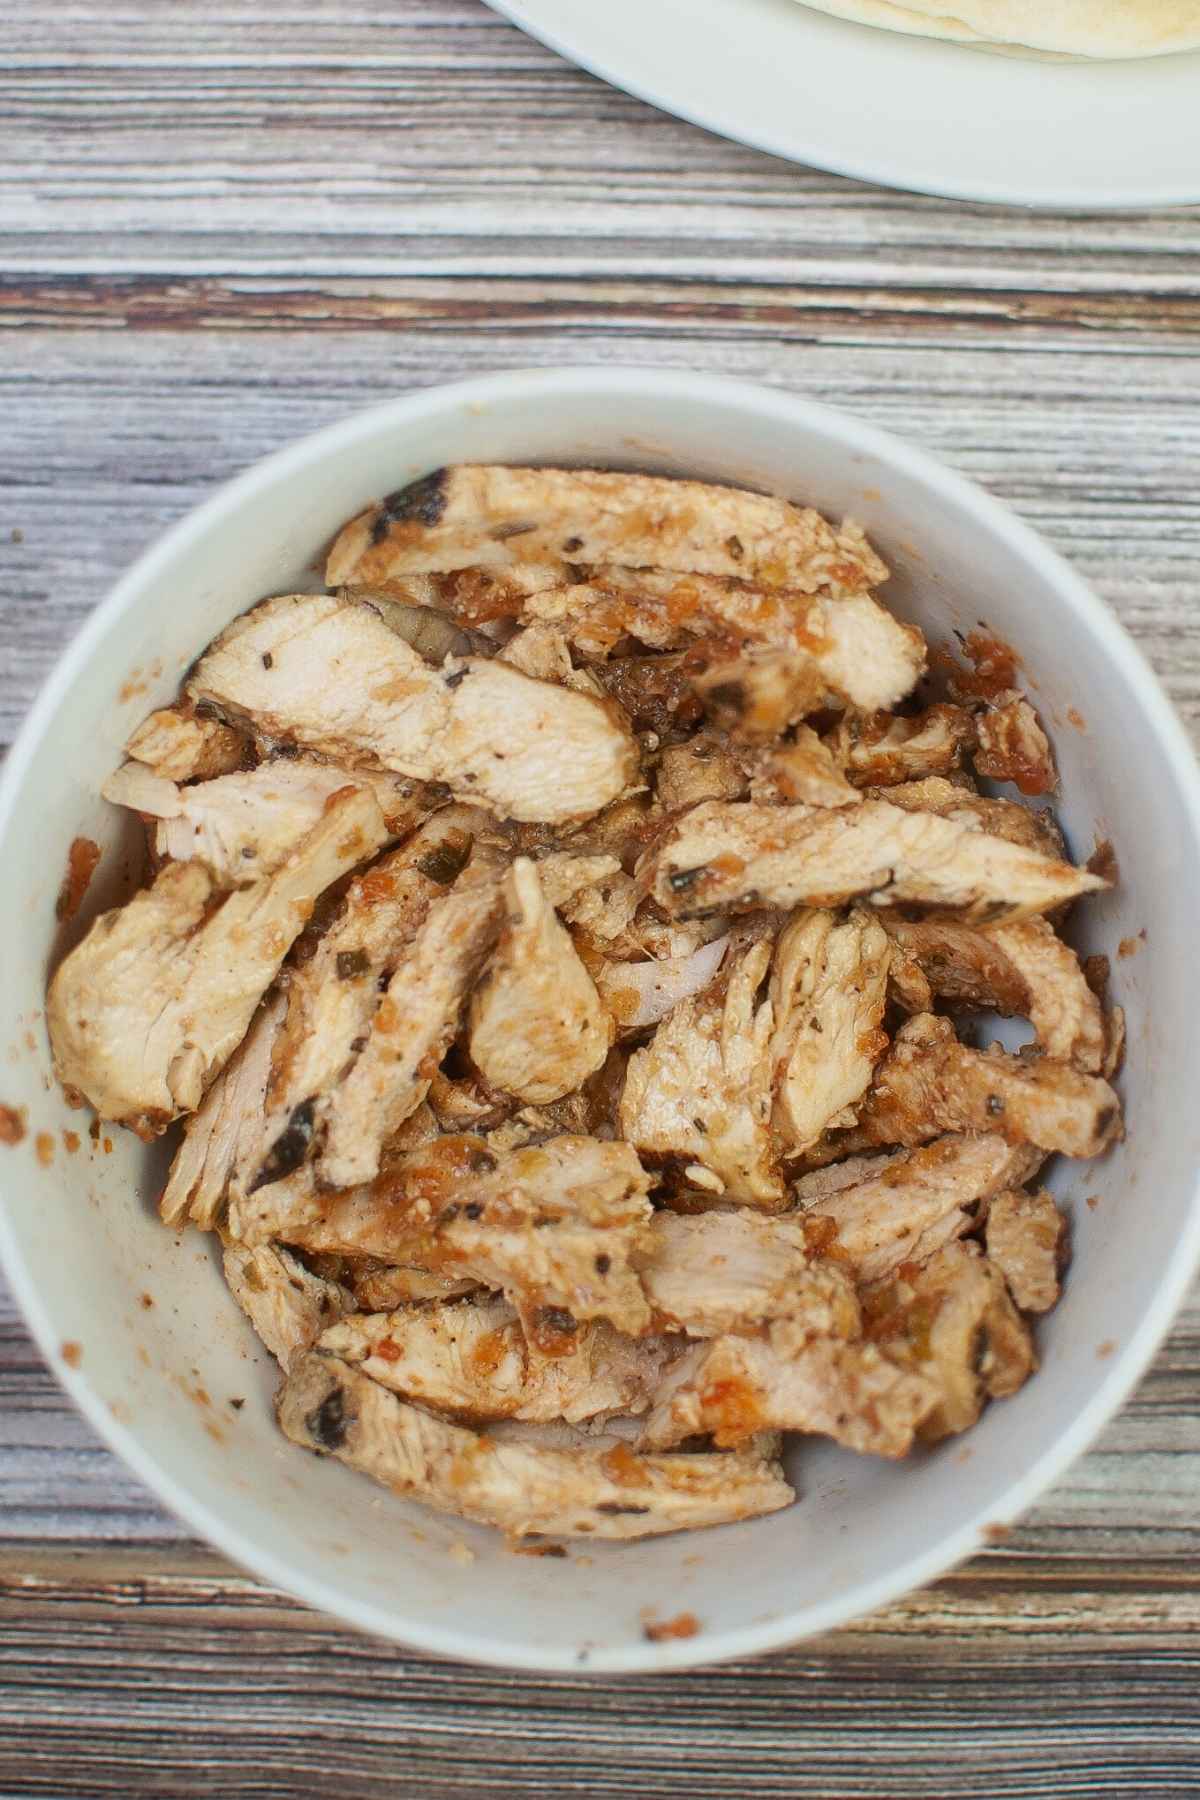 Grilled chicken strips with salsa in a white bowl.